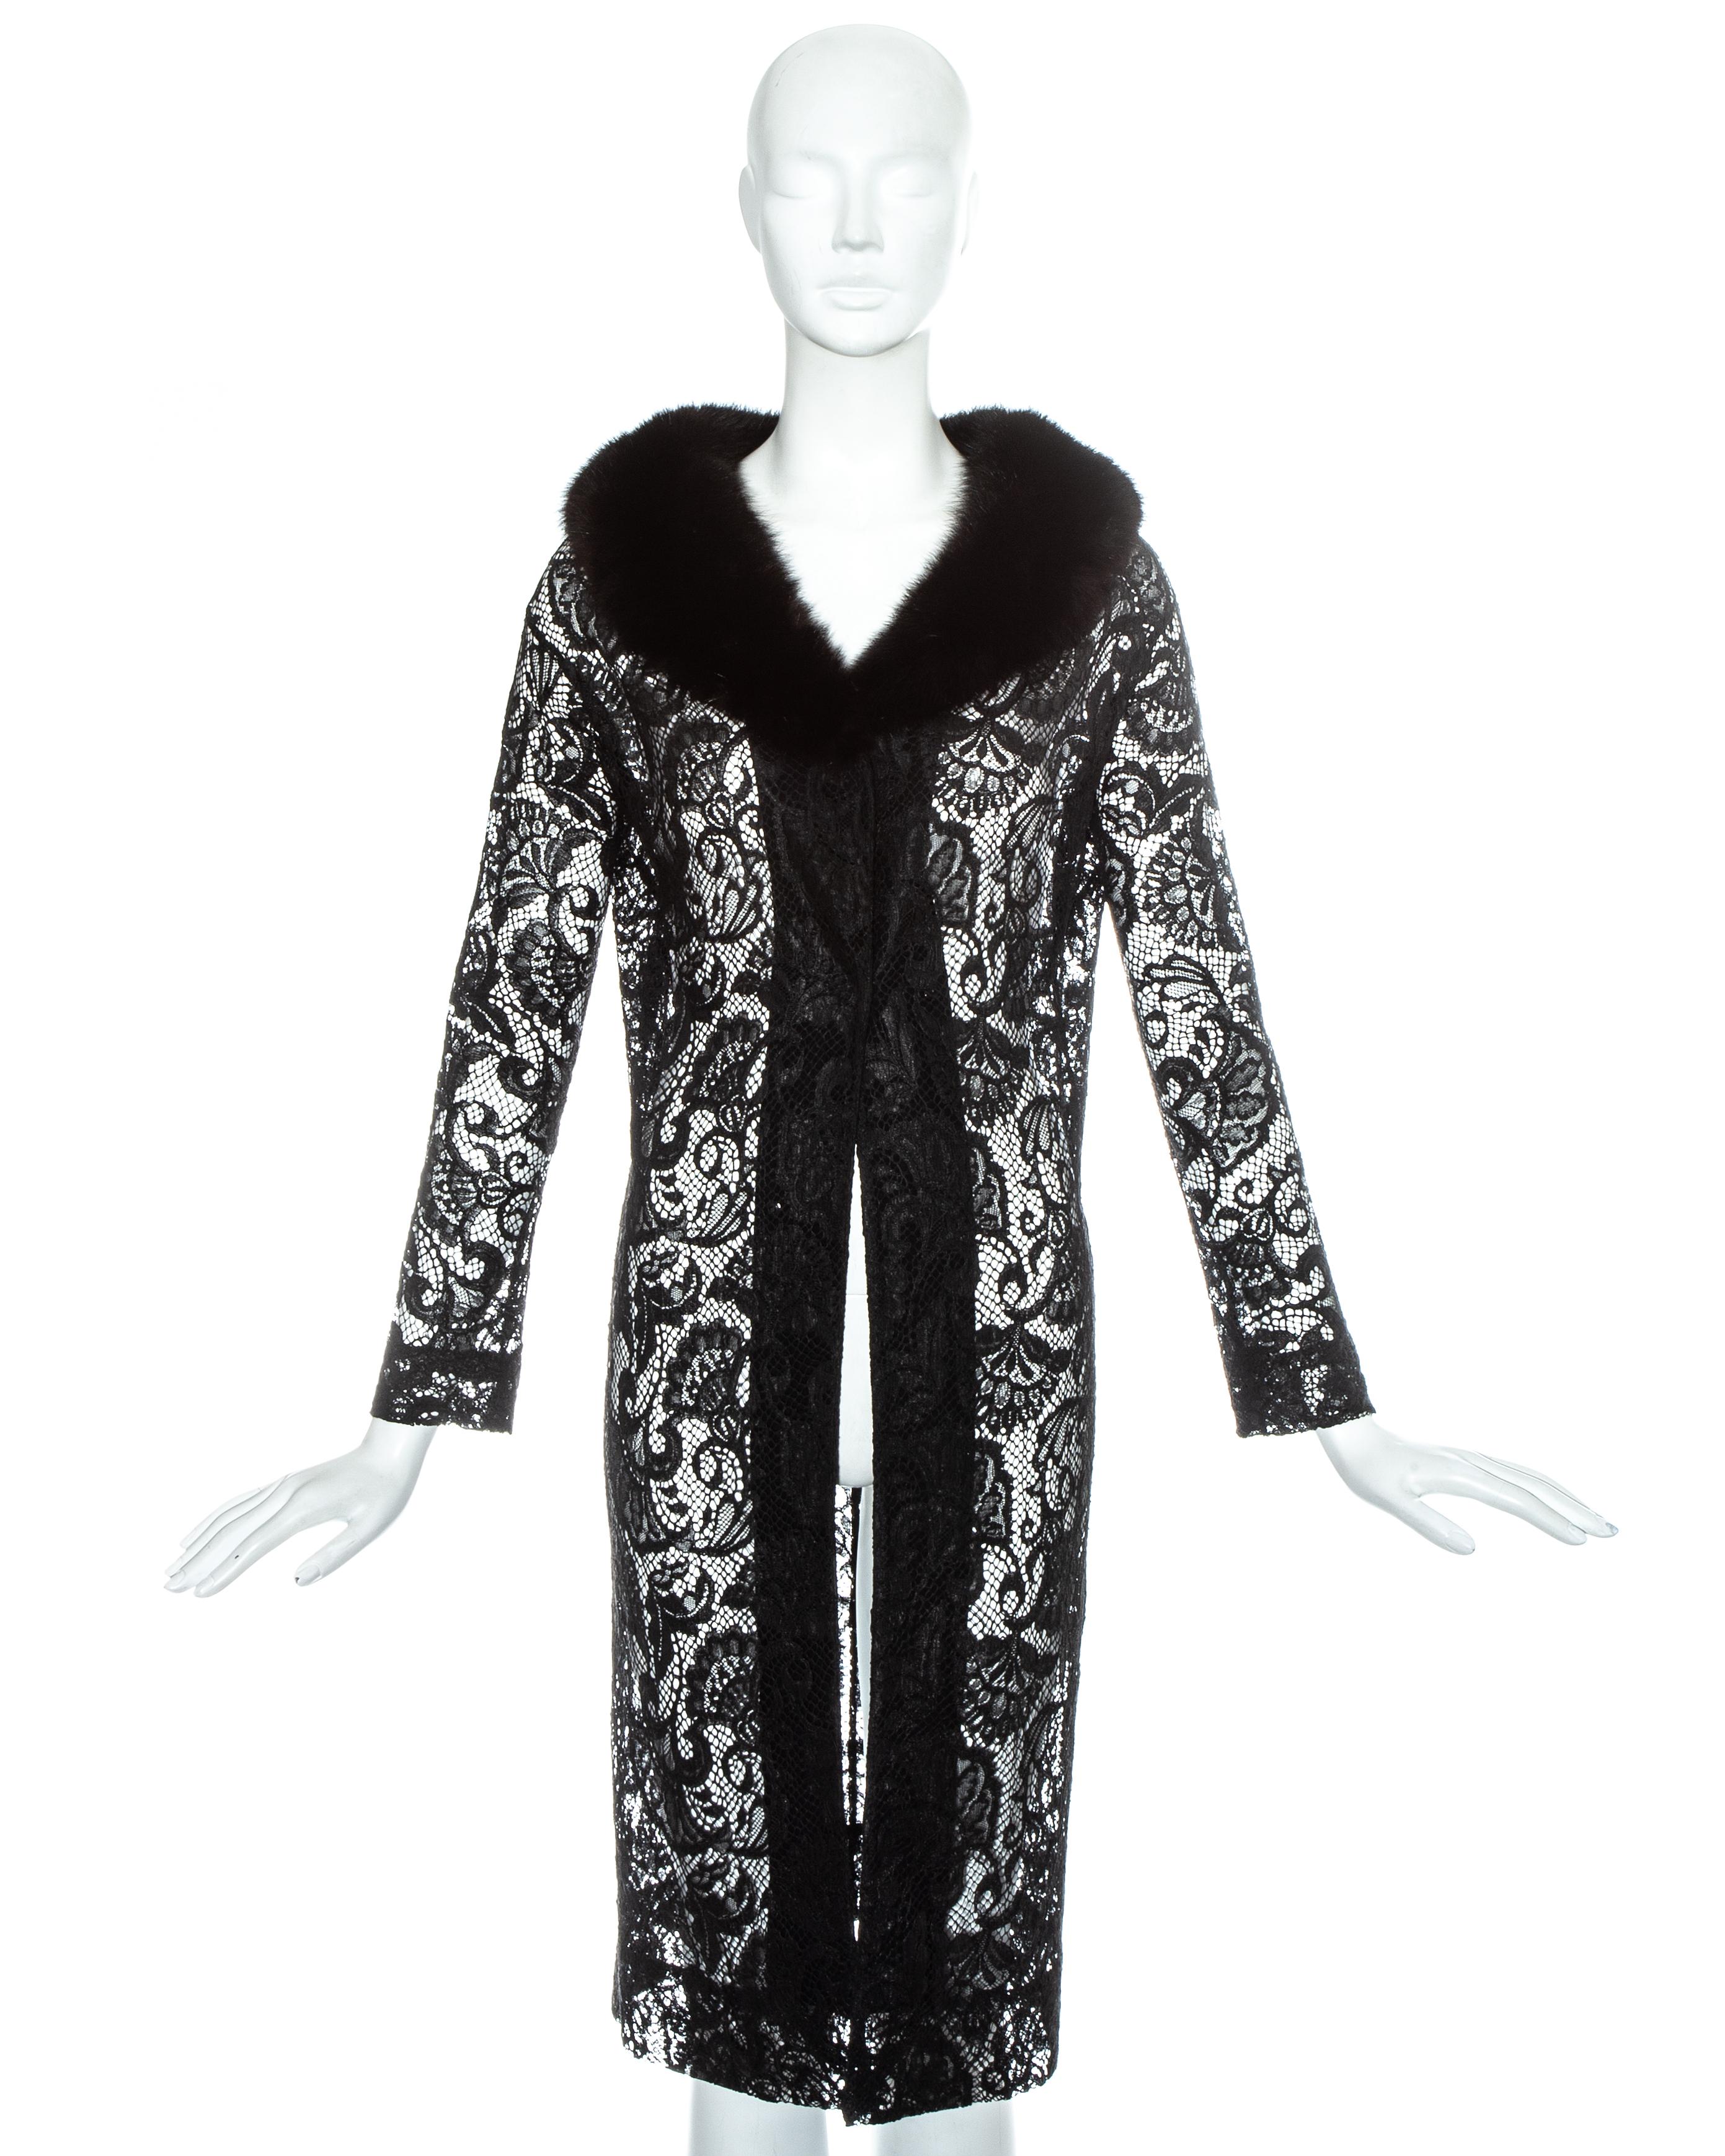 Dolce & Gabbana black lace evening coat with mink cur collar and detachable wool lining.

Fall-Winter 1997